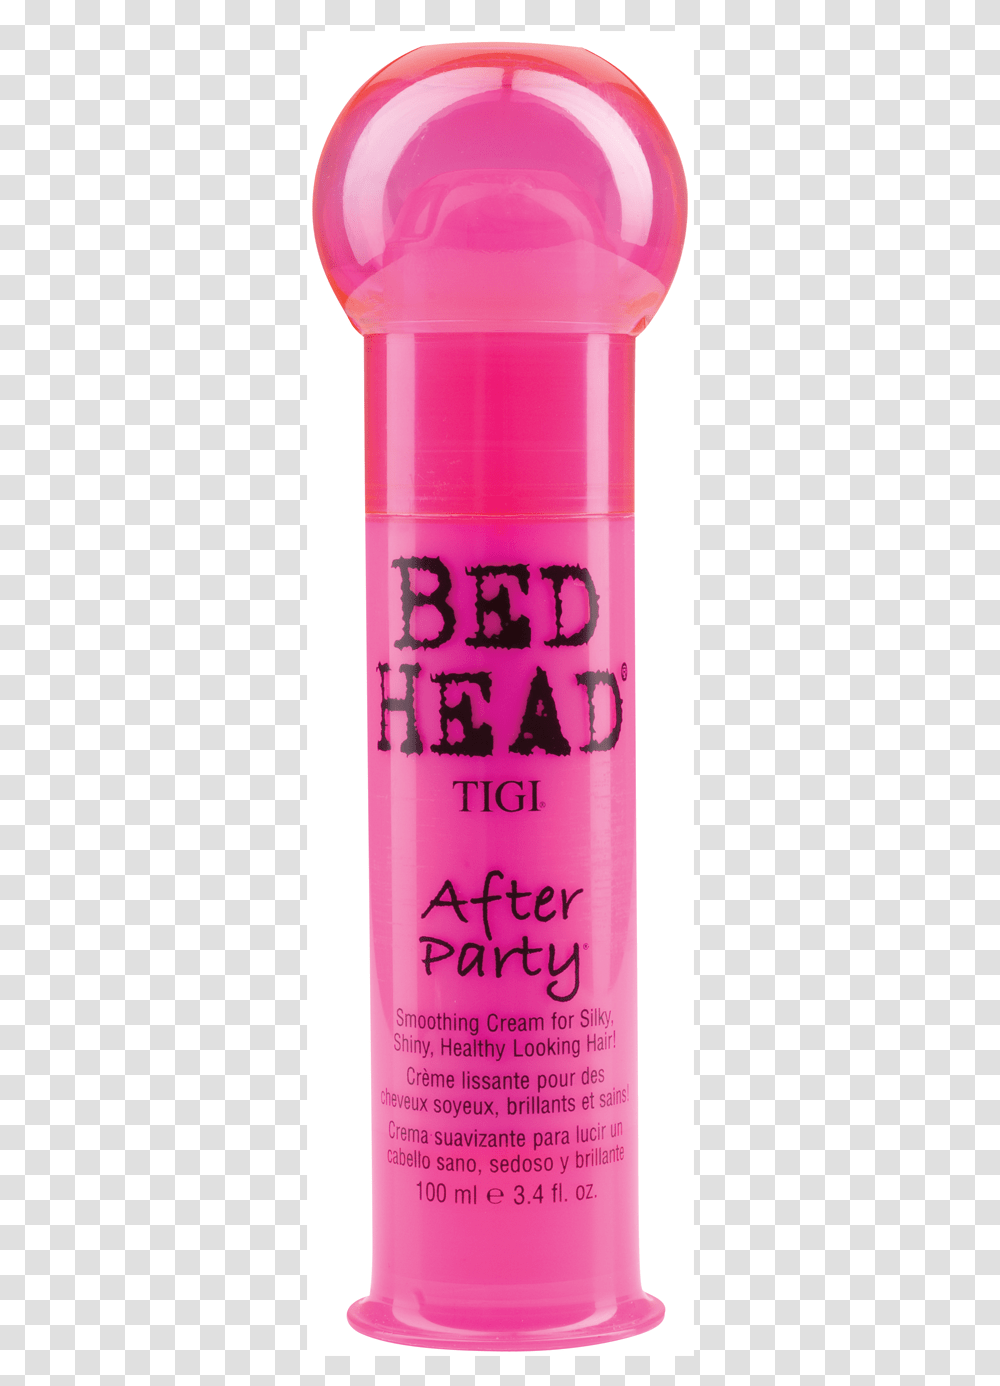 Bed Head After Party Smoothing Cream Tigi Bed Head, Cosmetics, Tin, Can, Aluminium Transparent Png